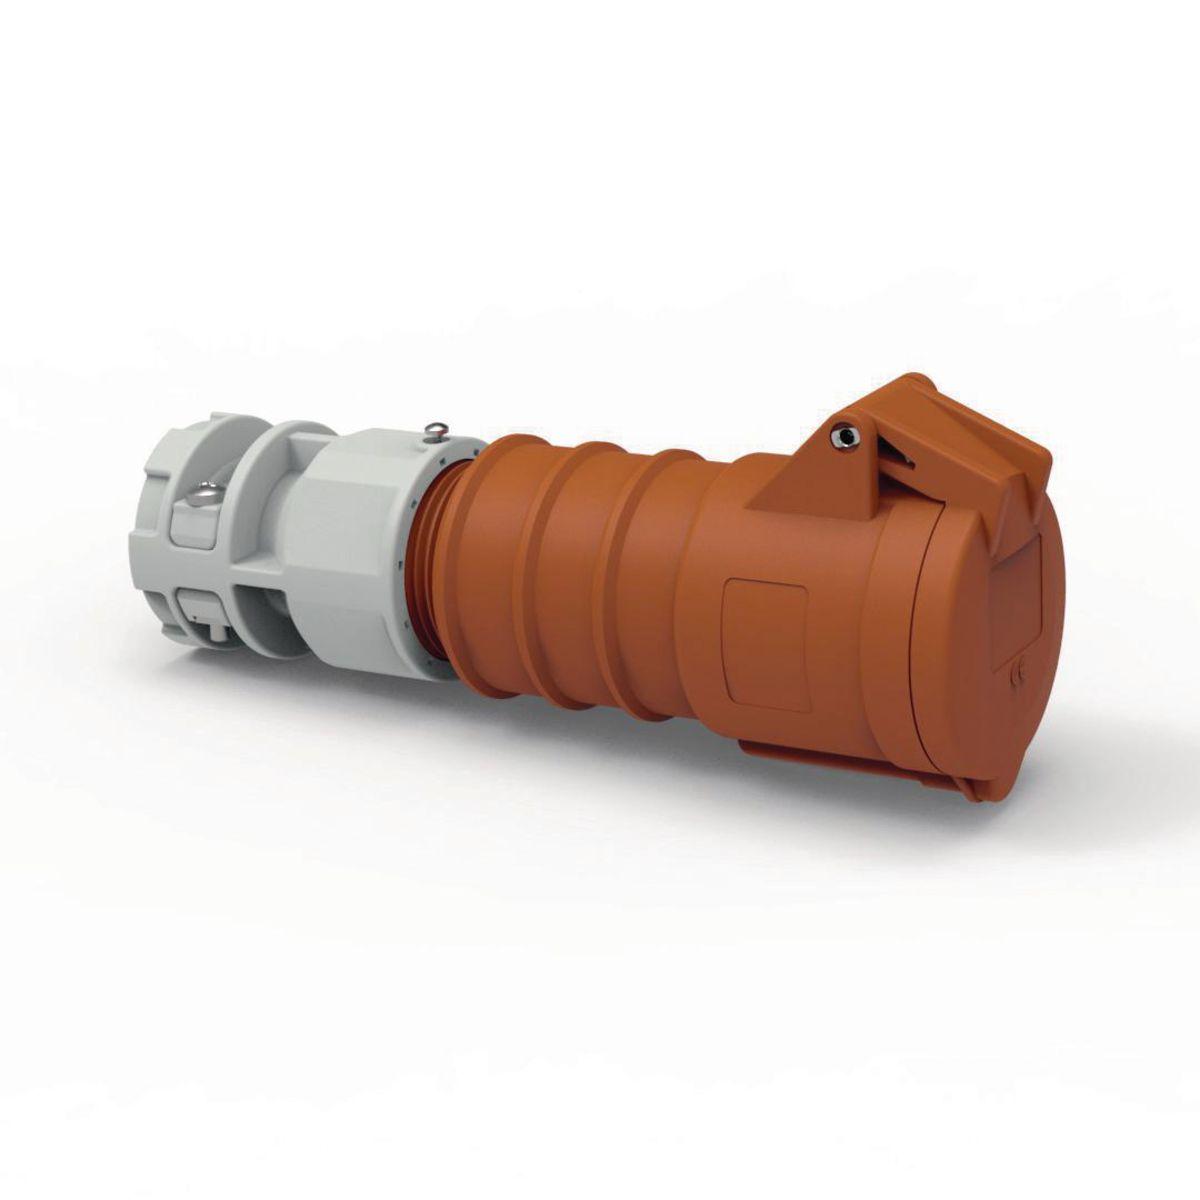 Hubbell C420C12SA Heavy Duty Products, IEC Pin and Sleeve Devices, Hubbell-PRO, Female, Connector Body, 20 A  125/250 VAC, 3-POLE 4-WIRE, Orange, Splash Proof  ; IP44 environmental ratings ; Impact and corrosion resistant insulated non-metallic housing ; Sequential contact